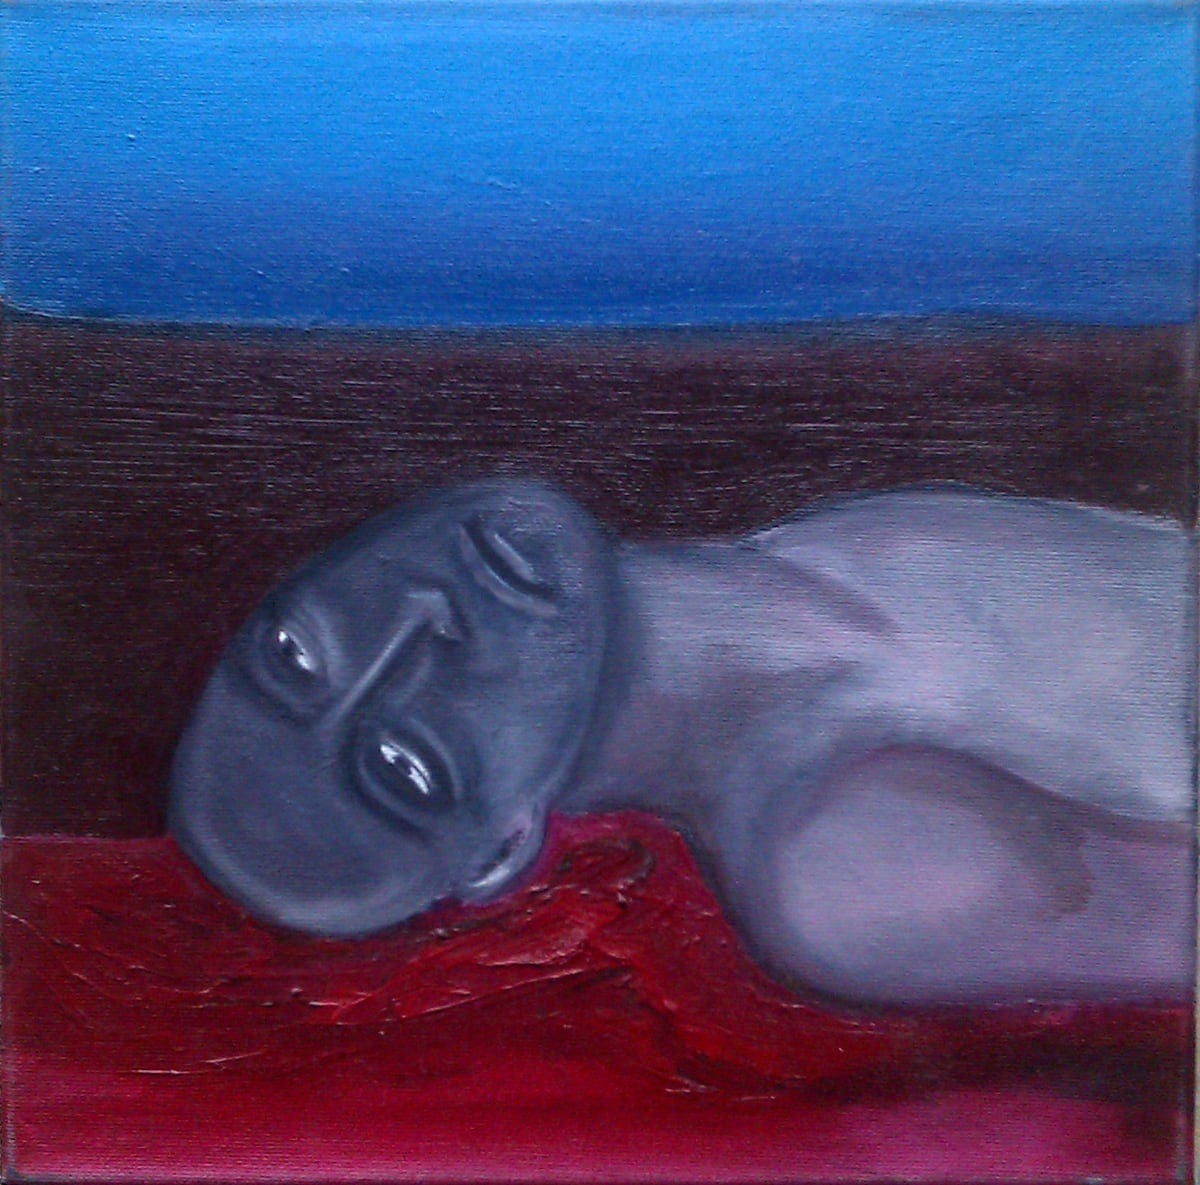 Even Angels Die and/or Razboi Oil on canvas by artist Amy Adams (2008/9)